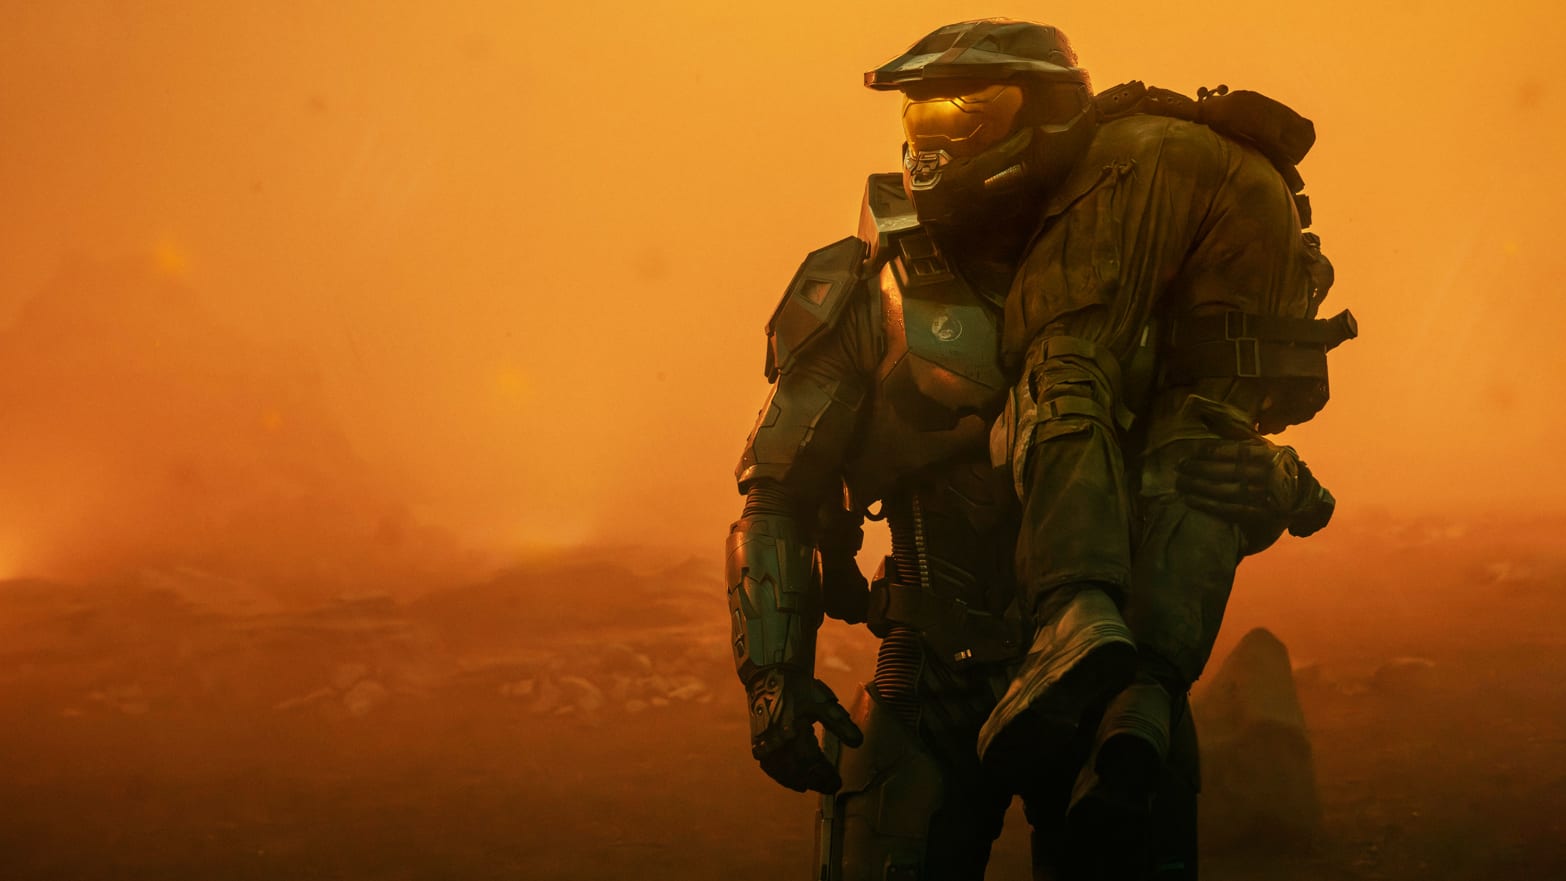 A photo including a still from the series Halo on Paramount+ 